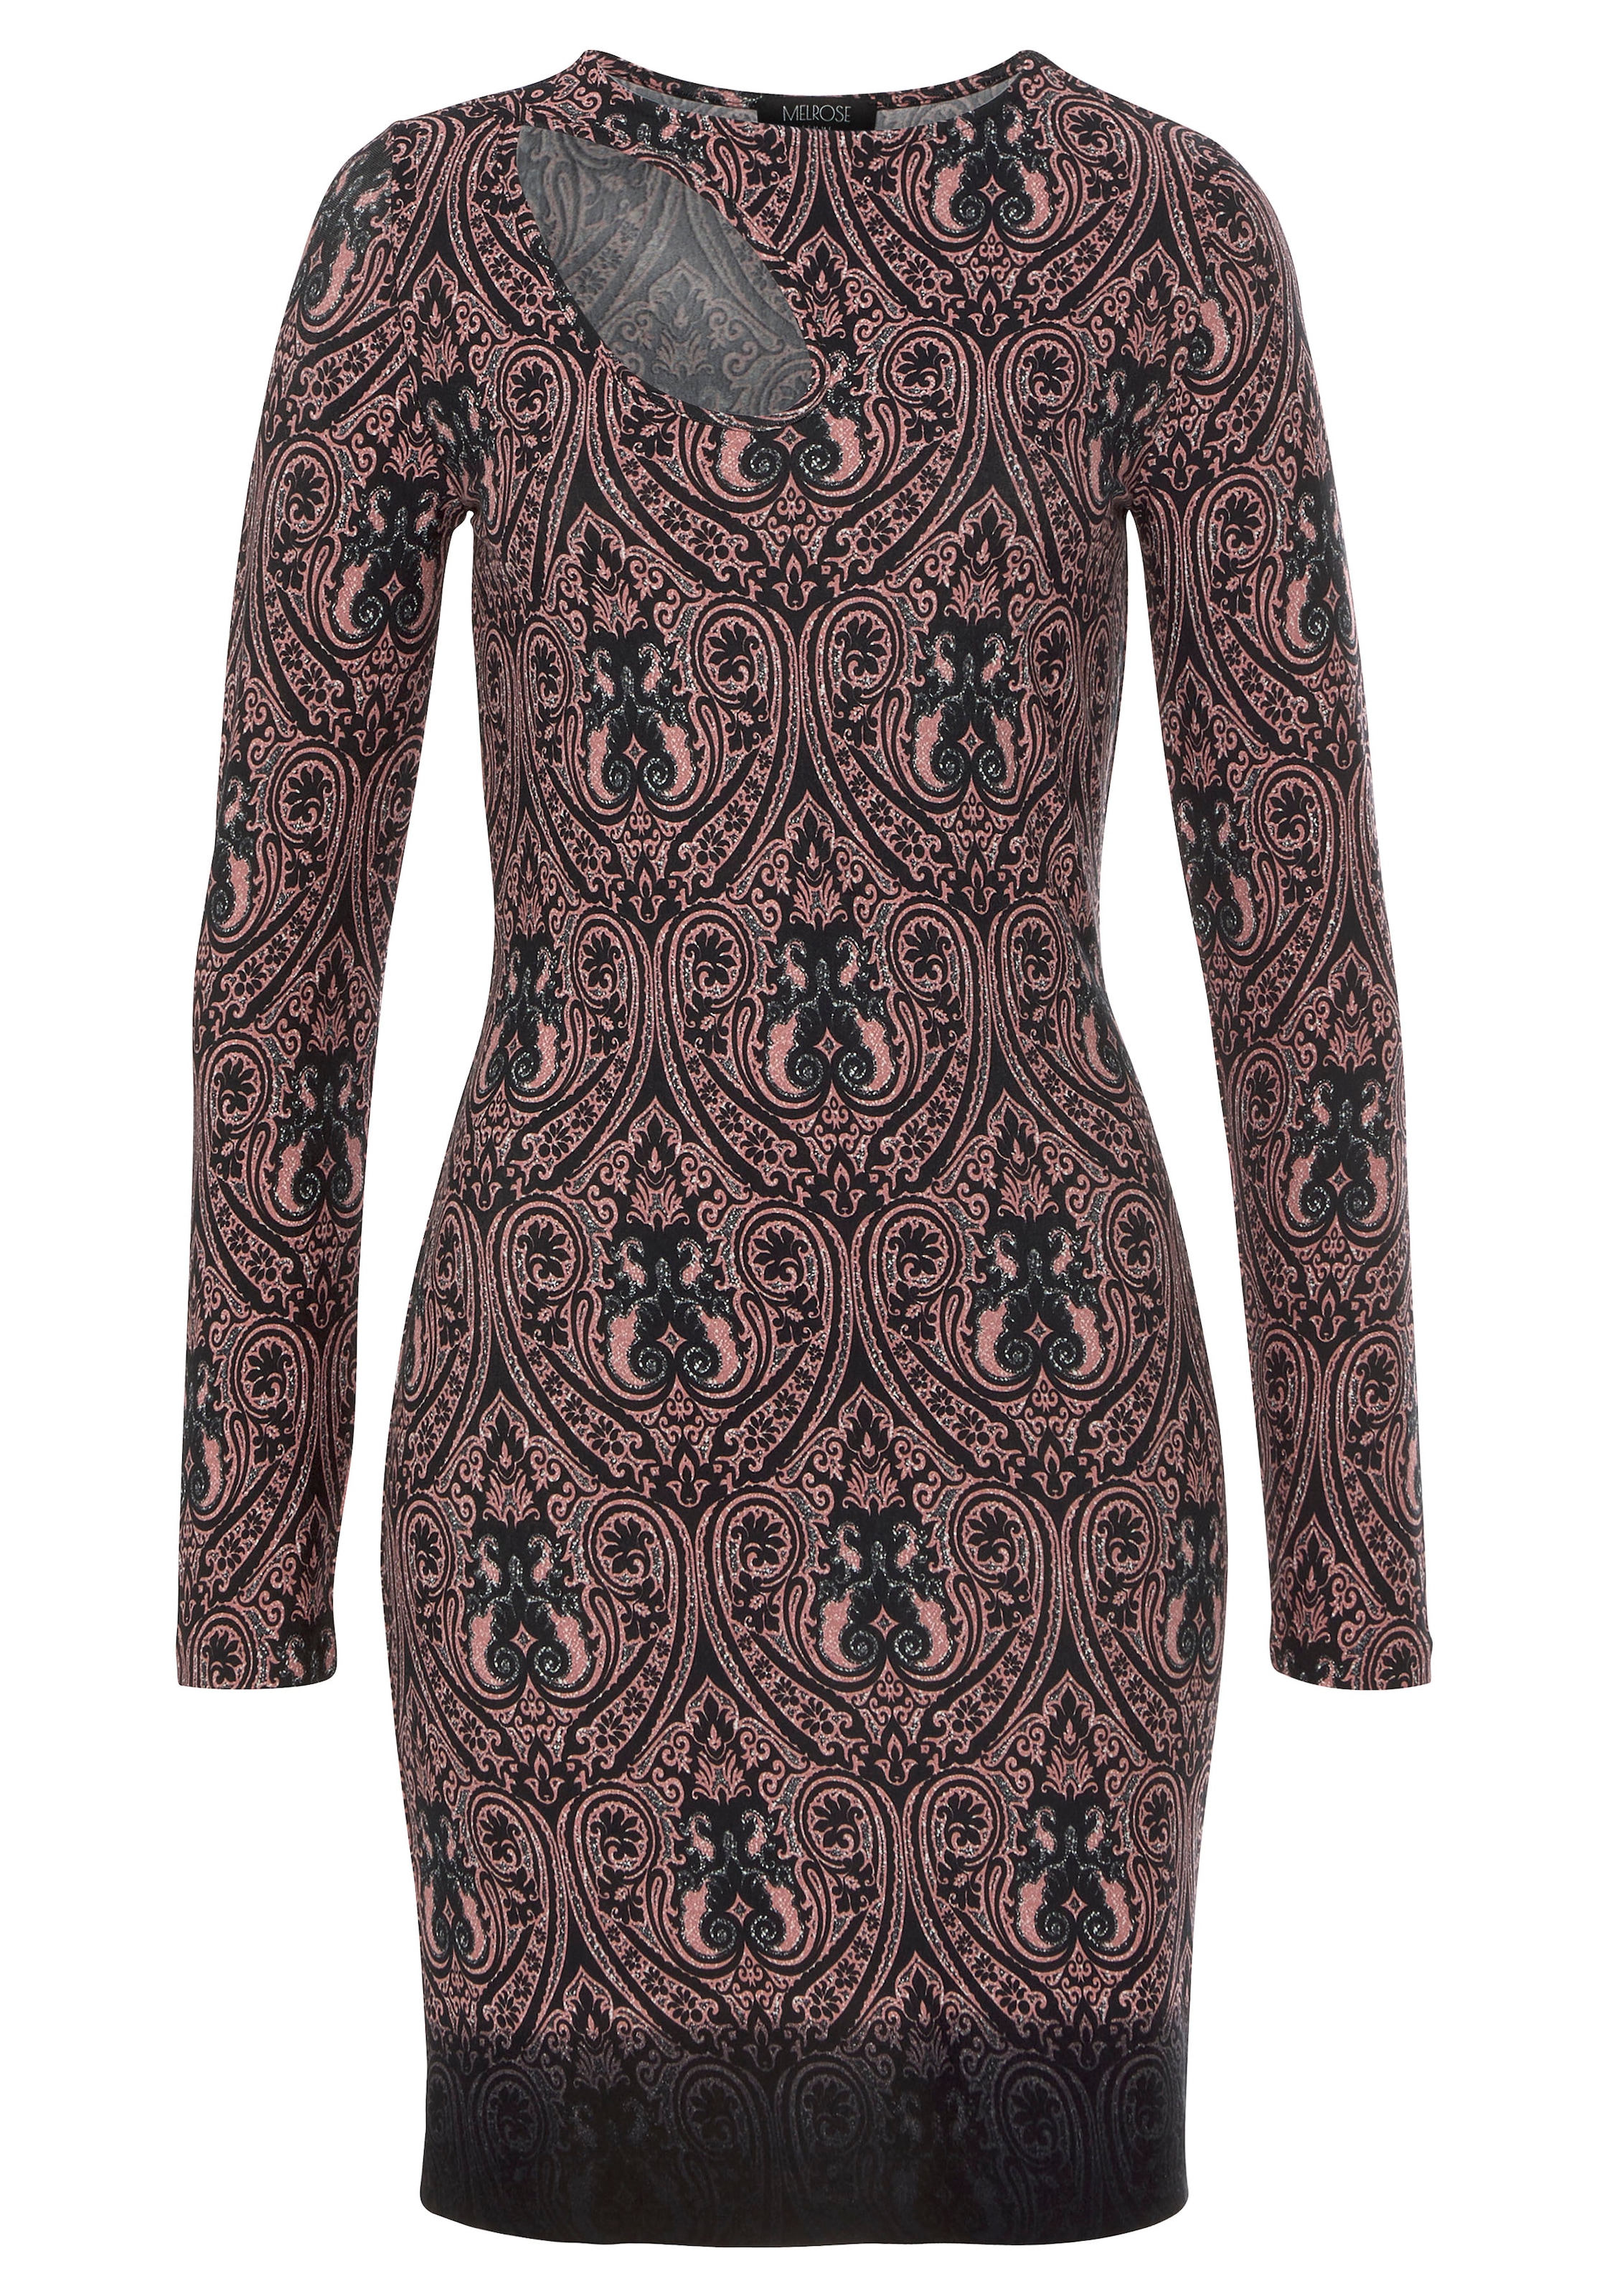 Melrose Jerseykleid, mit Cut-Out und Paisley-Muster